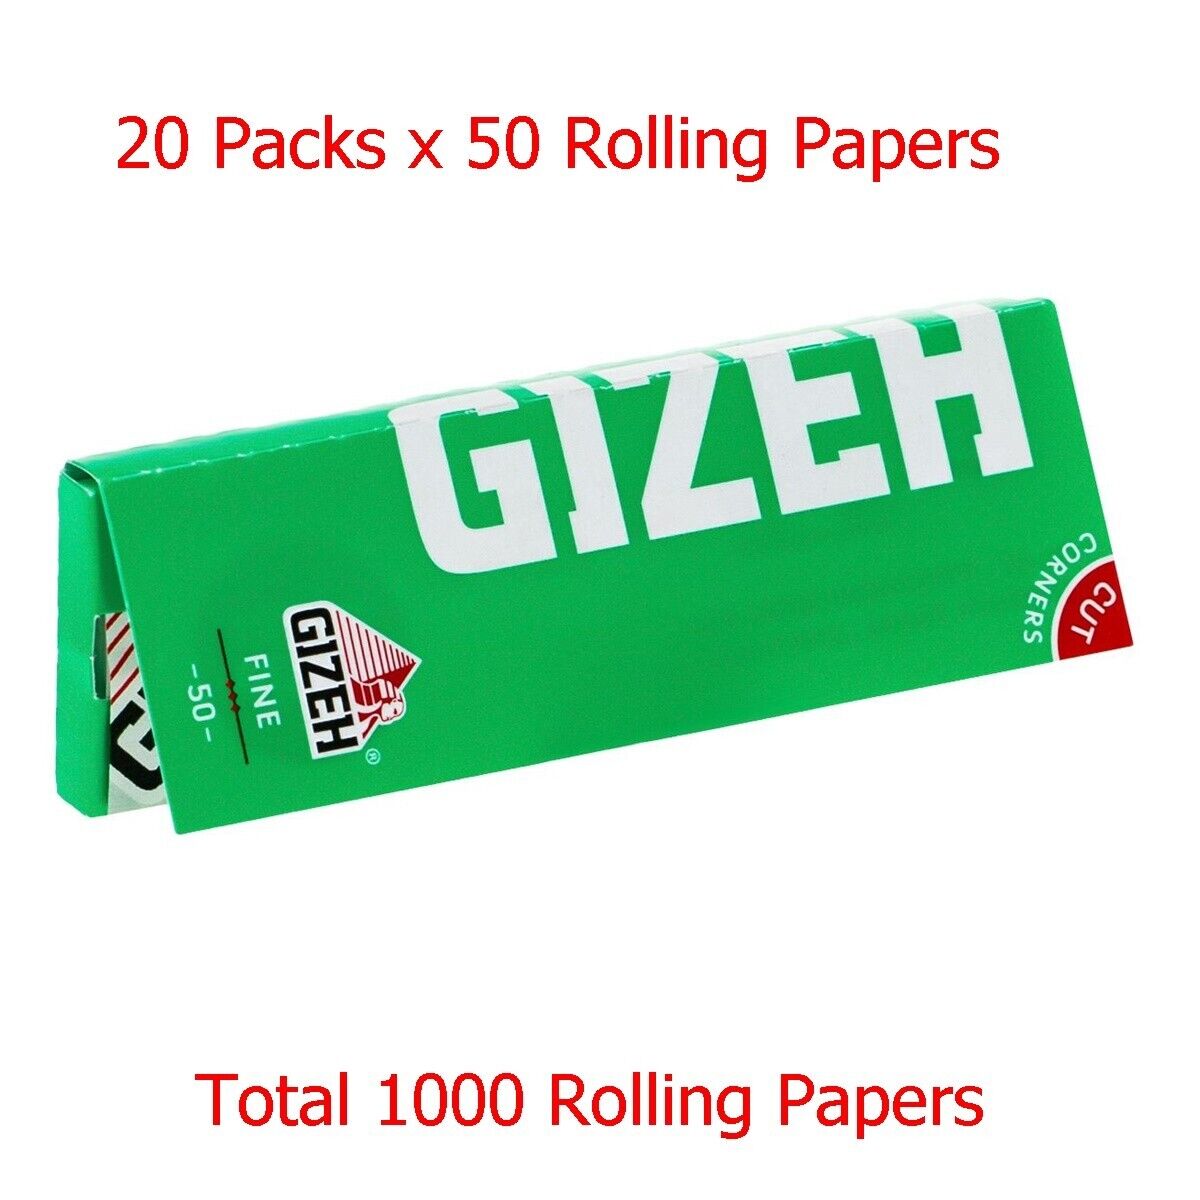 20-Packs Gizeh Fine Rolling Papers Regular x 50 papers each - Total 1000 papers